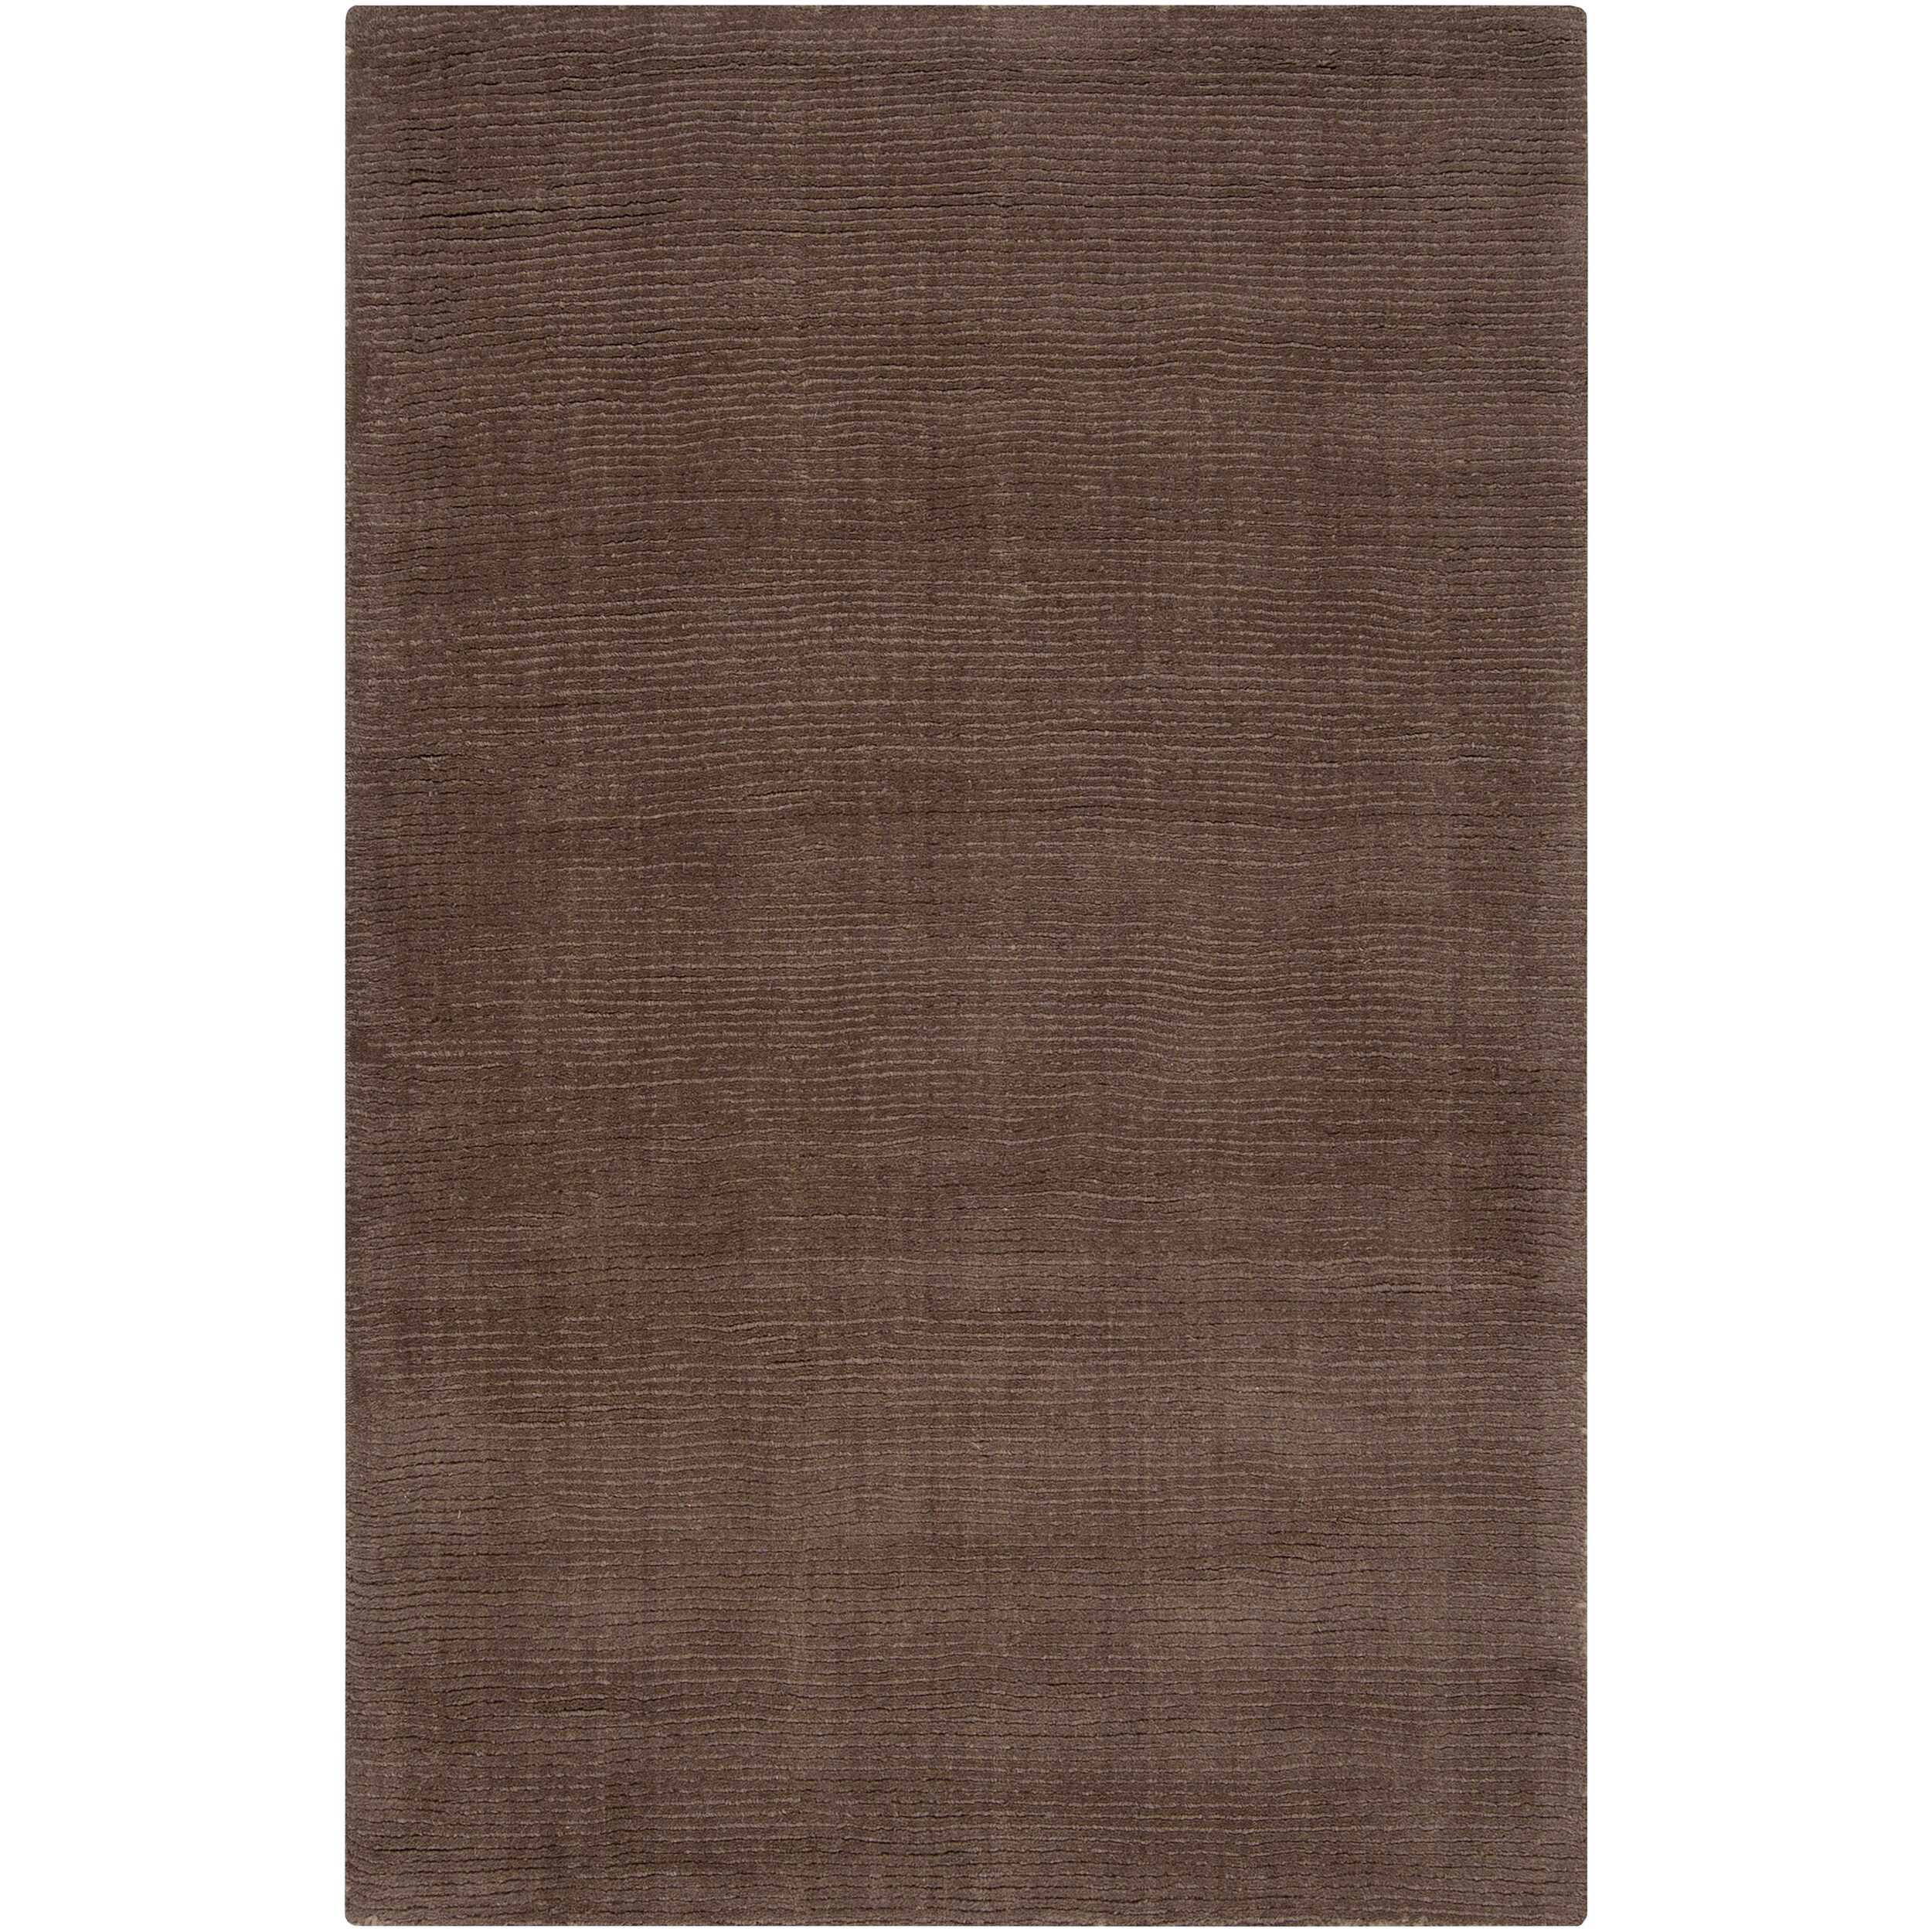 Hand crafted Solid Brown Casual Mantra Wool Rug (5 X 8)